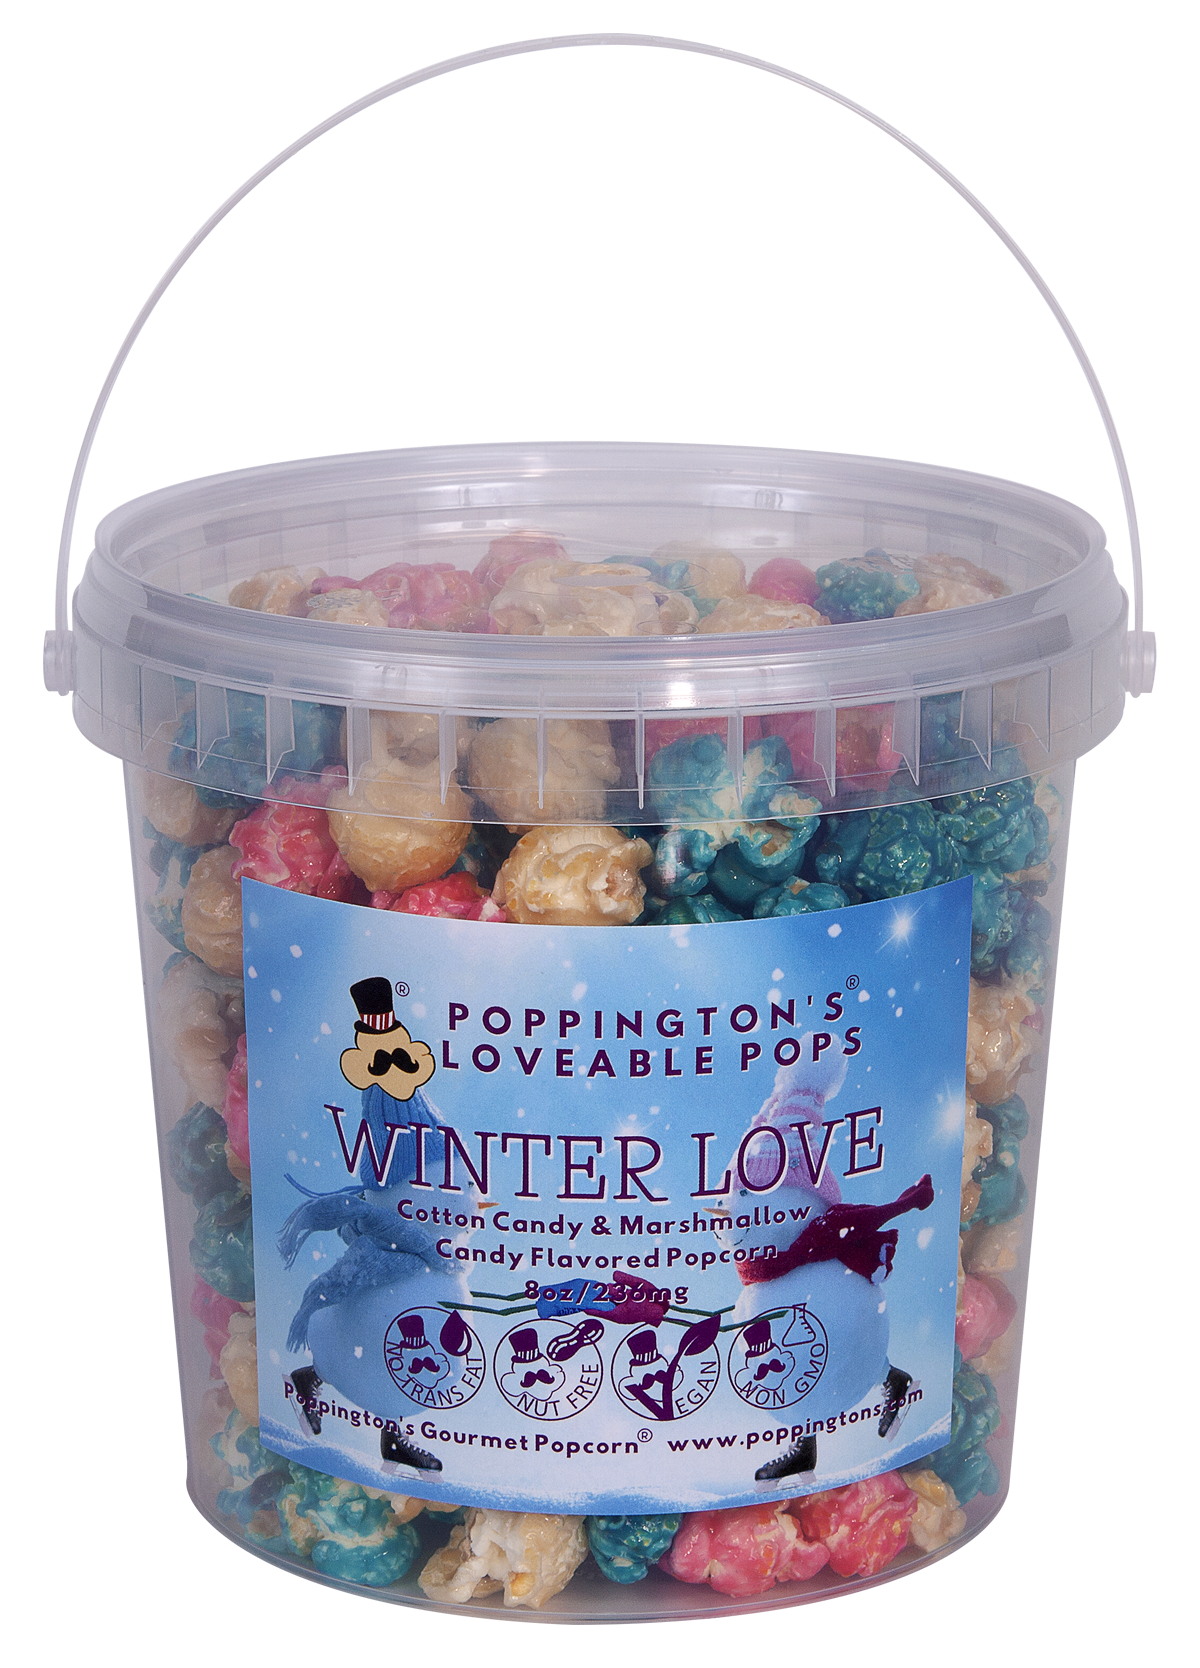 Poppington's Loveable Pops Pails Winter Collection Winter Love Flavor from Poppington's Gourmet Popcorn